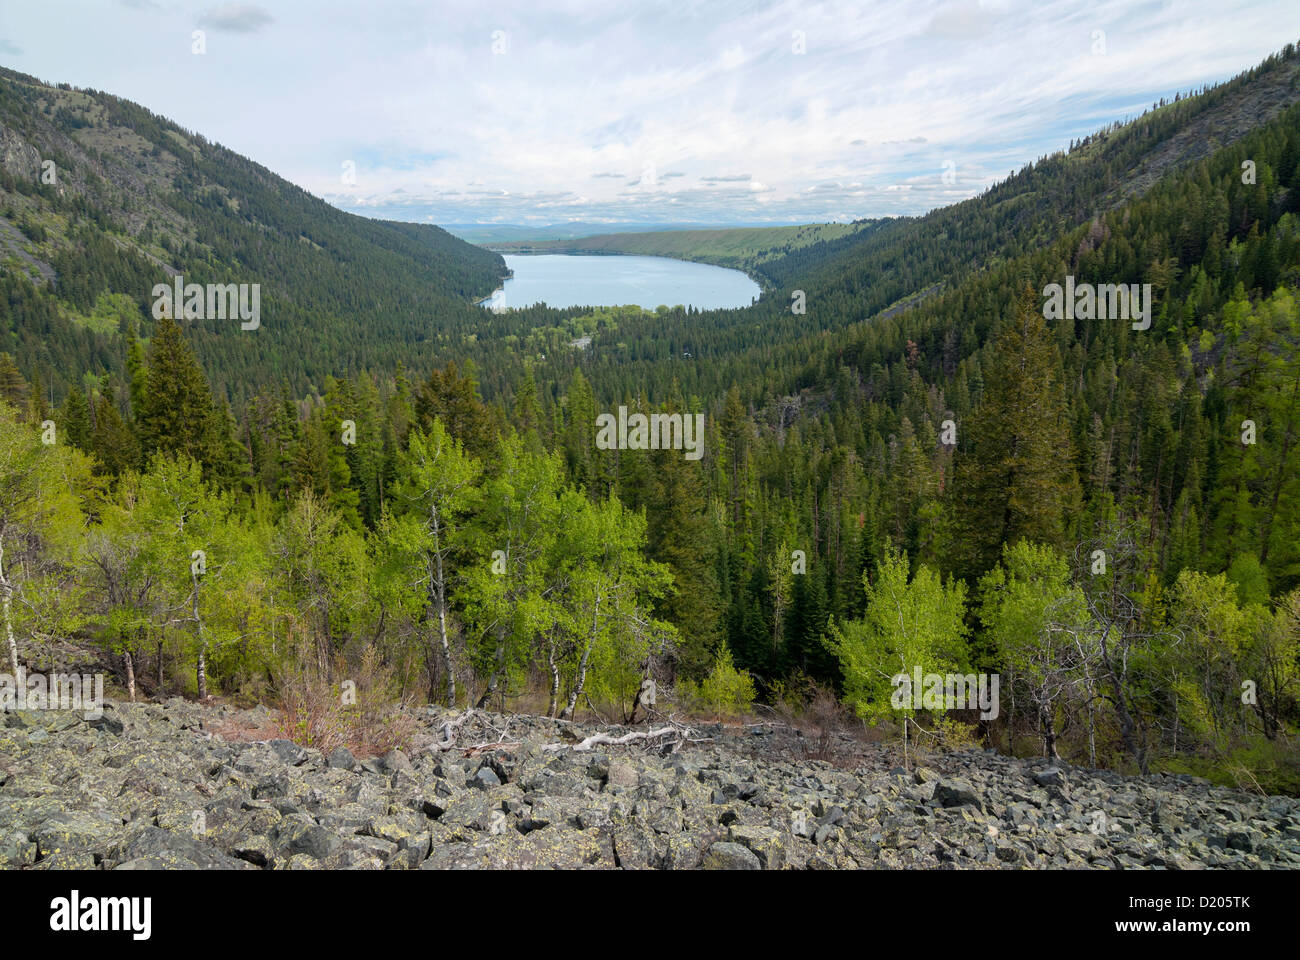 Talus slope in the Wallowa Mountains with Wallowa Lake in the distance. Stock Photo